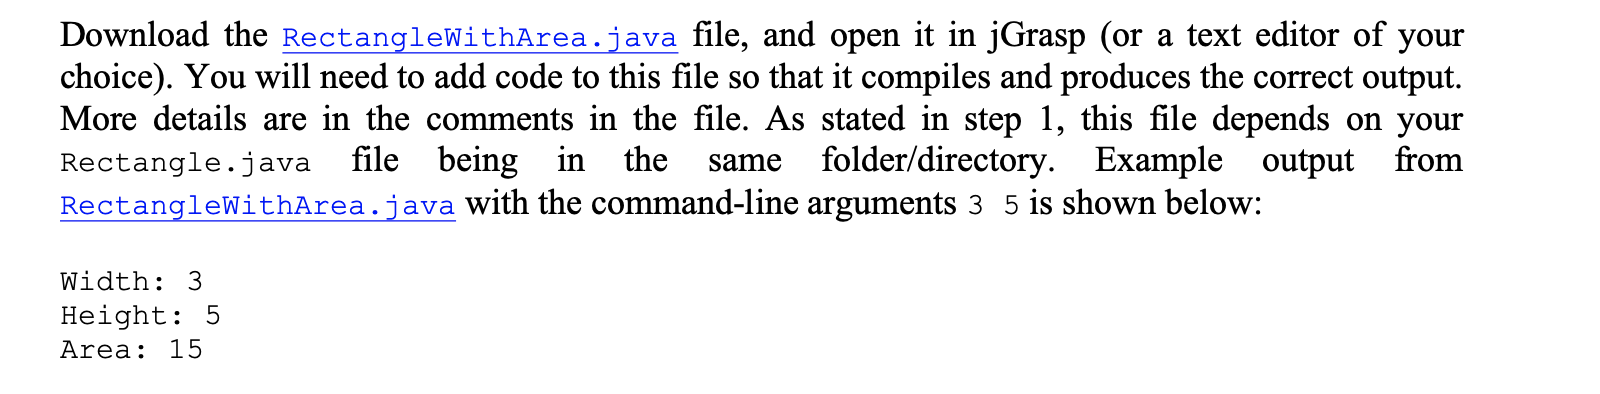 Download the RectangleWithArea.java file, and open it in jGrasp (or a text editor of your choice). You will need to add code